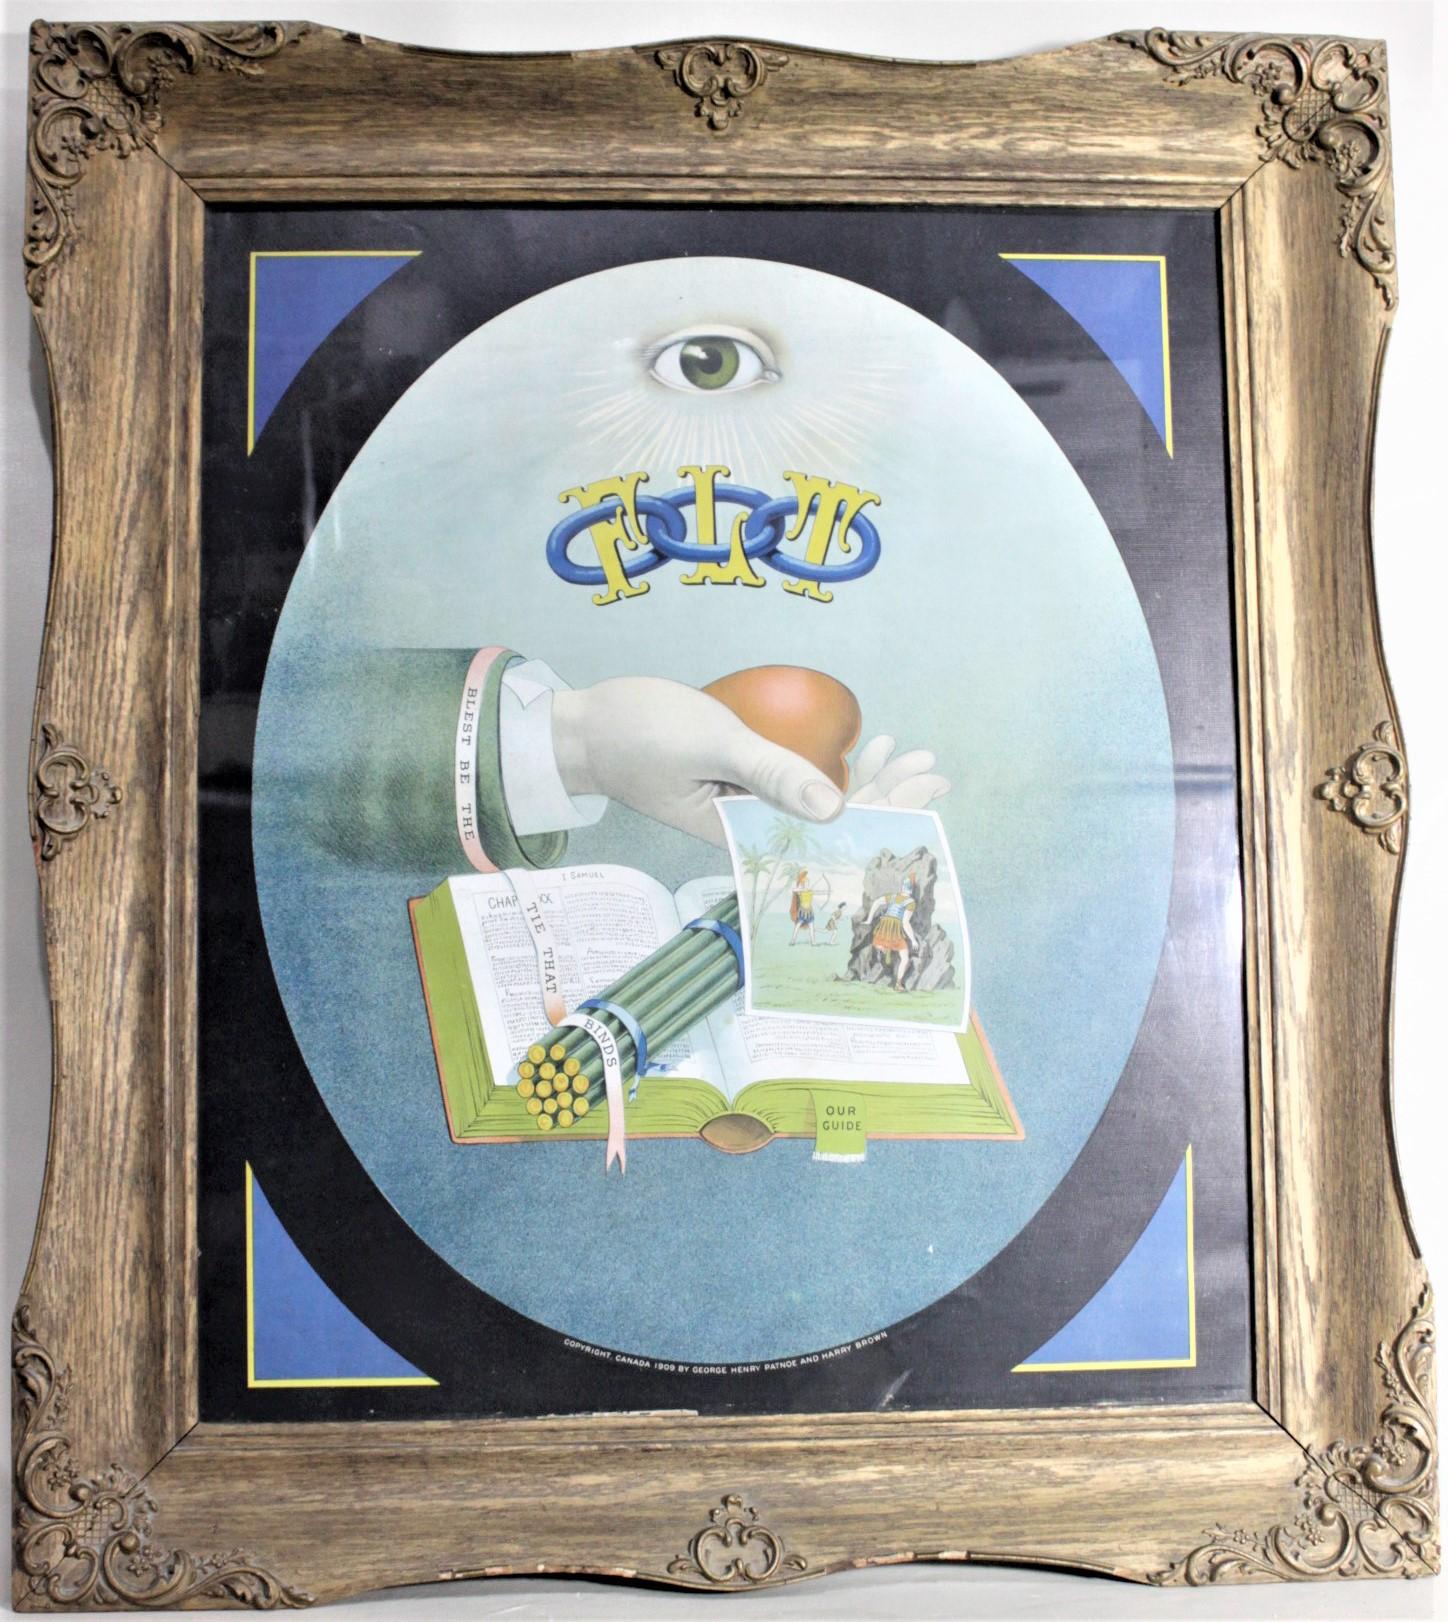 This antique print in its original frame was copyrighted by George Henry Patnoe & Henry Brown of Canada in 1909 in a Victorian style. The print depicts the symbolism of the Lodge and its underlying philosophy and we will not attempt to decipher it's